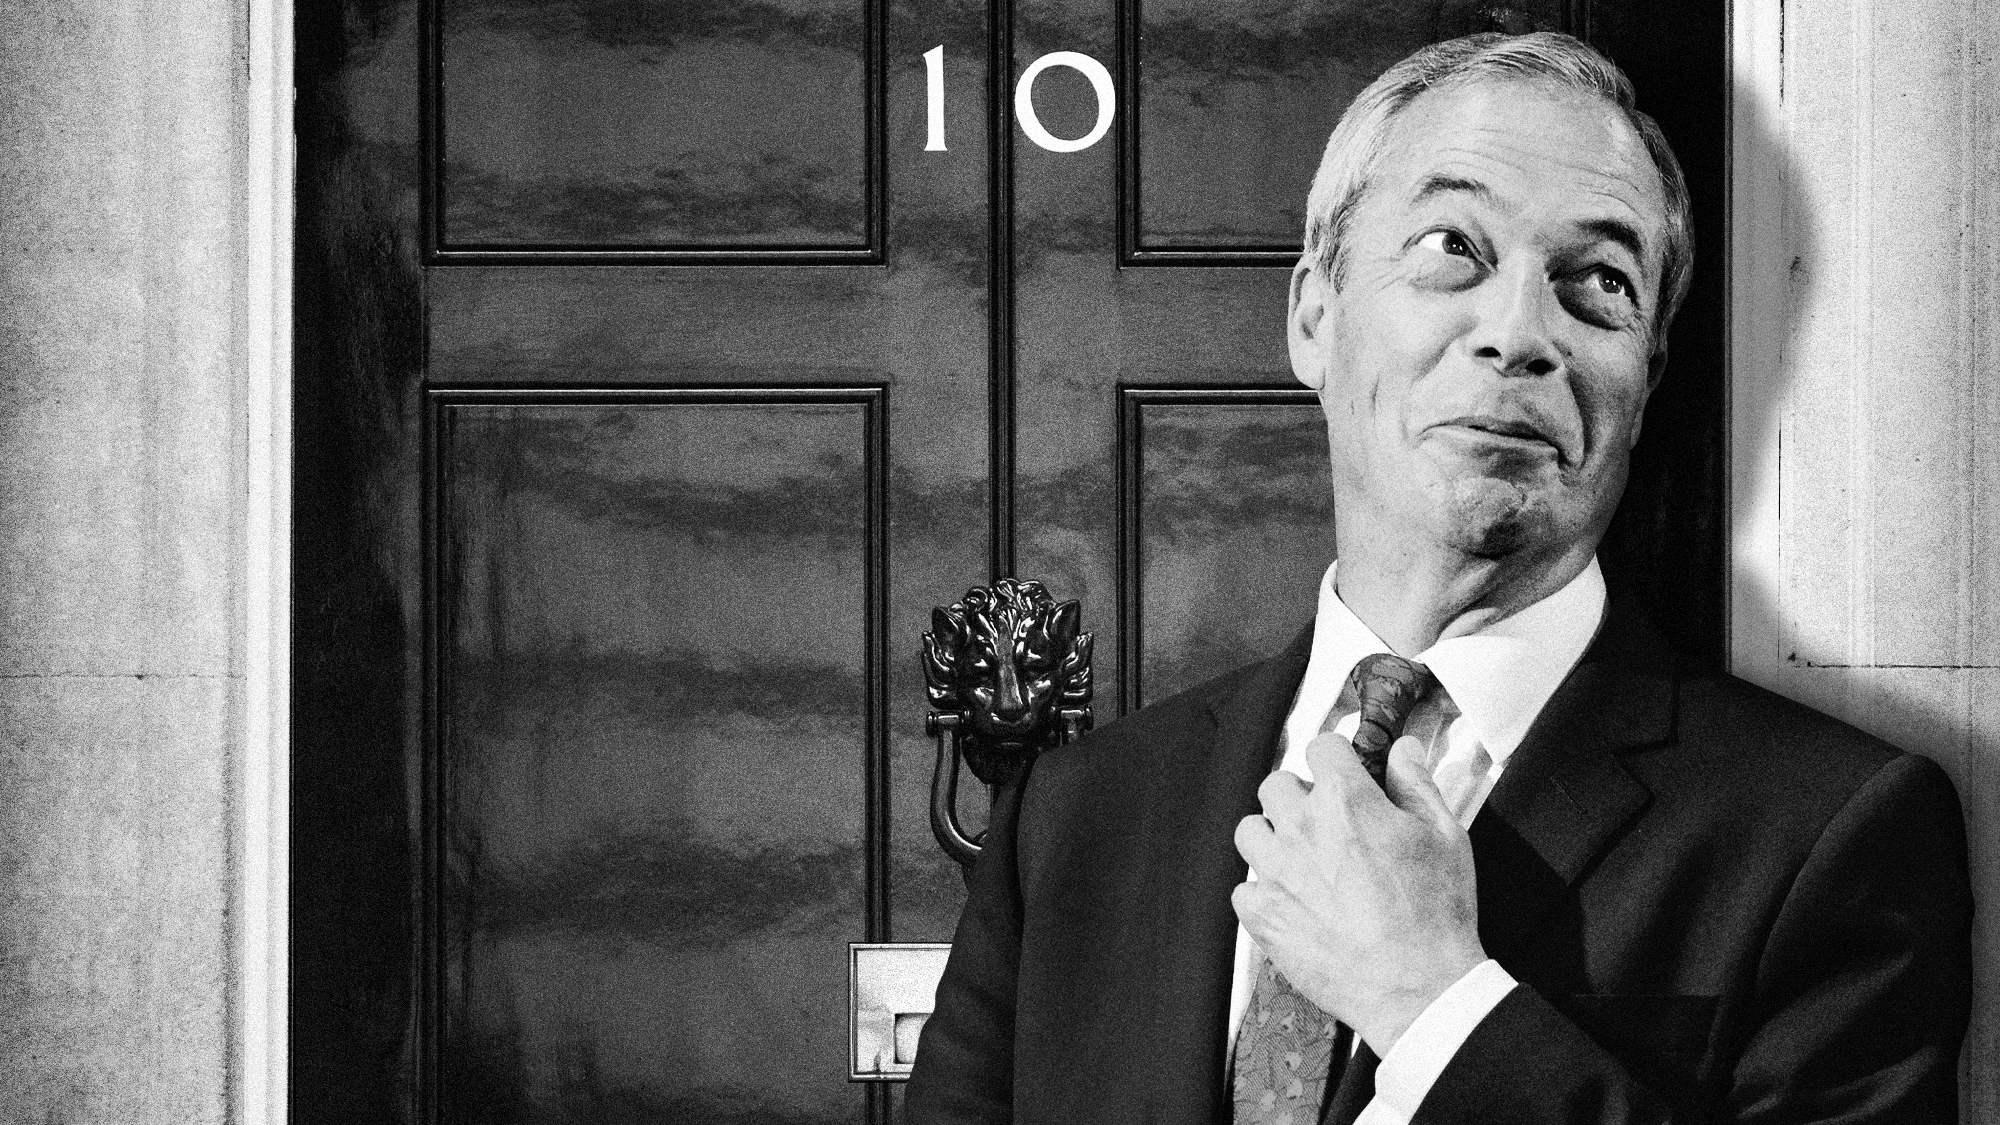  Will Nigel Farage be PM by 2030? 